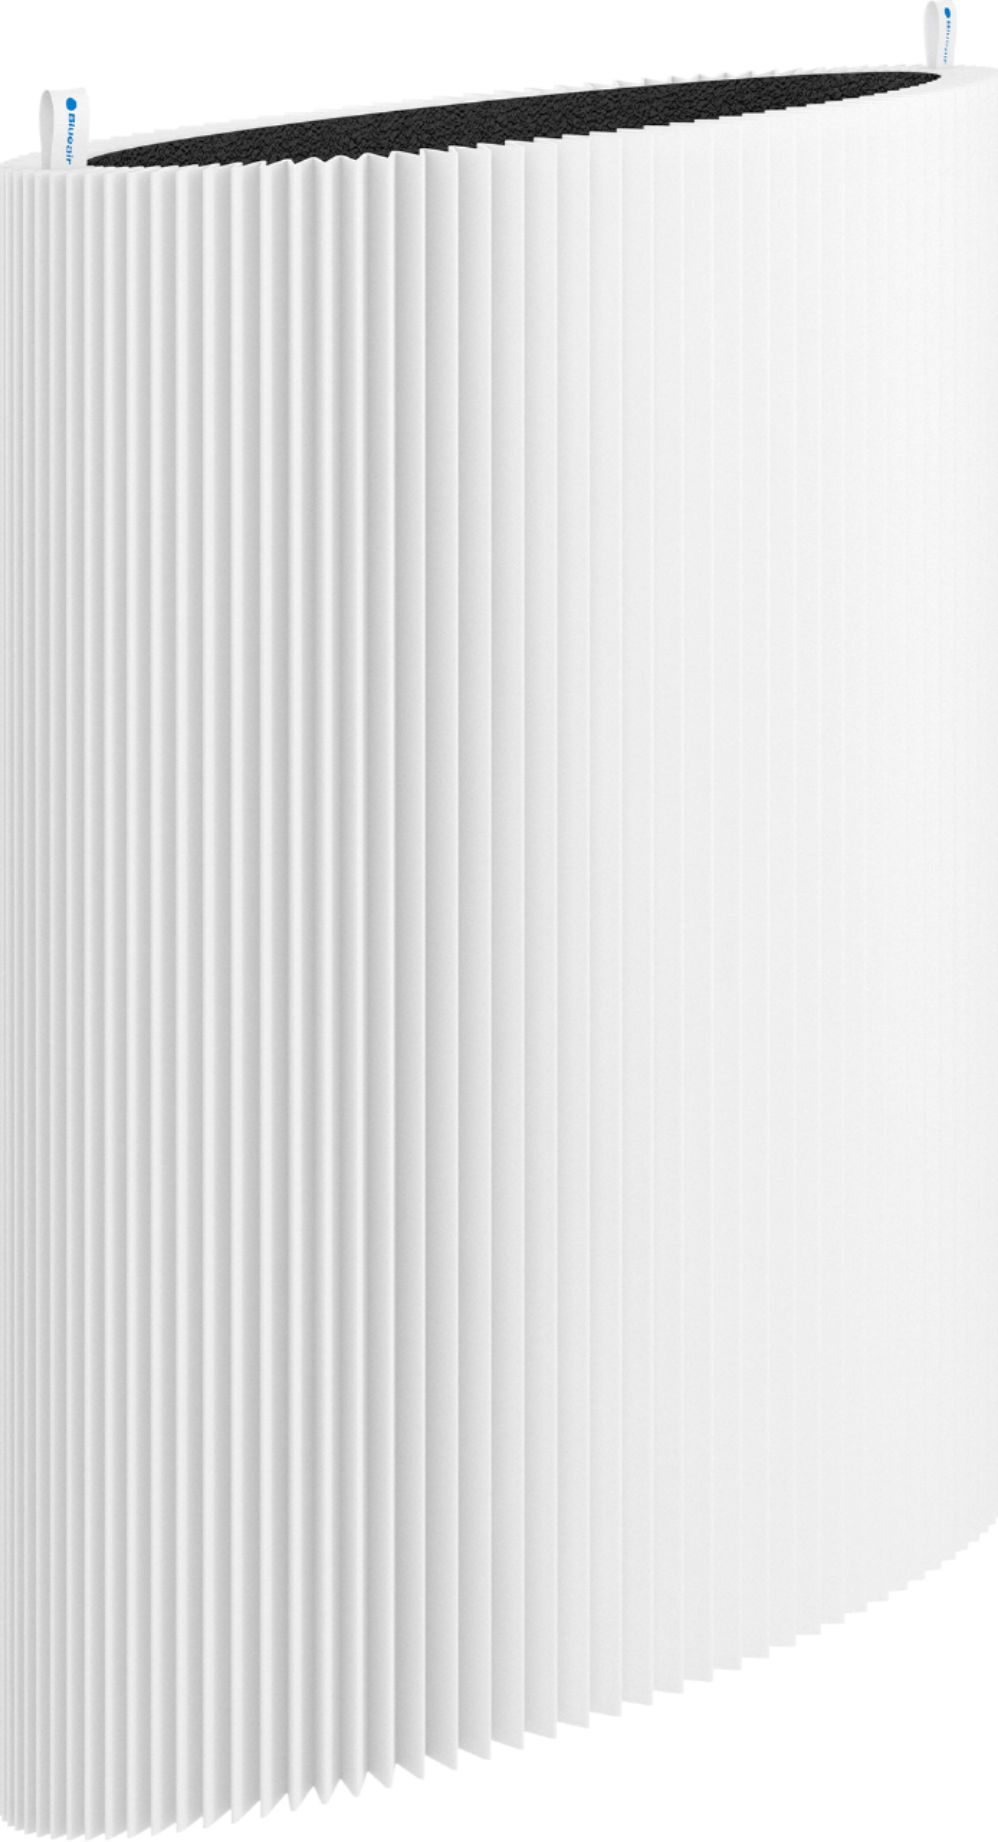 Image of Blueair - Replacement Filter for Blue Pure 411, 411+, 411 Auto Air Purifiers - Black/White